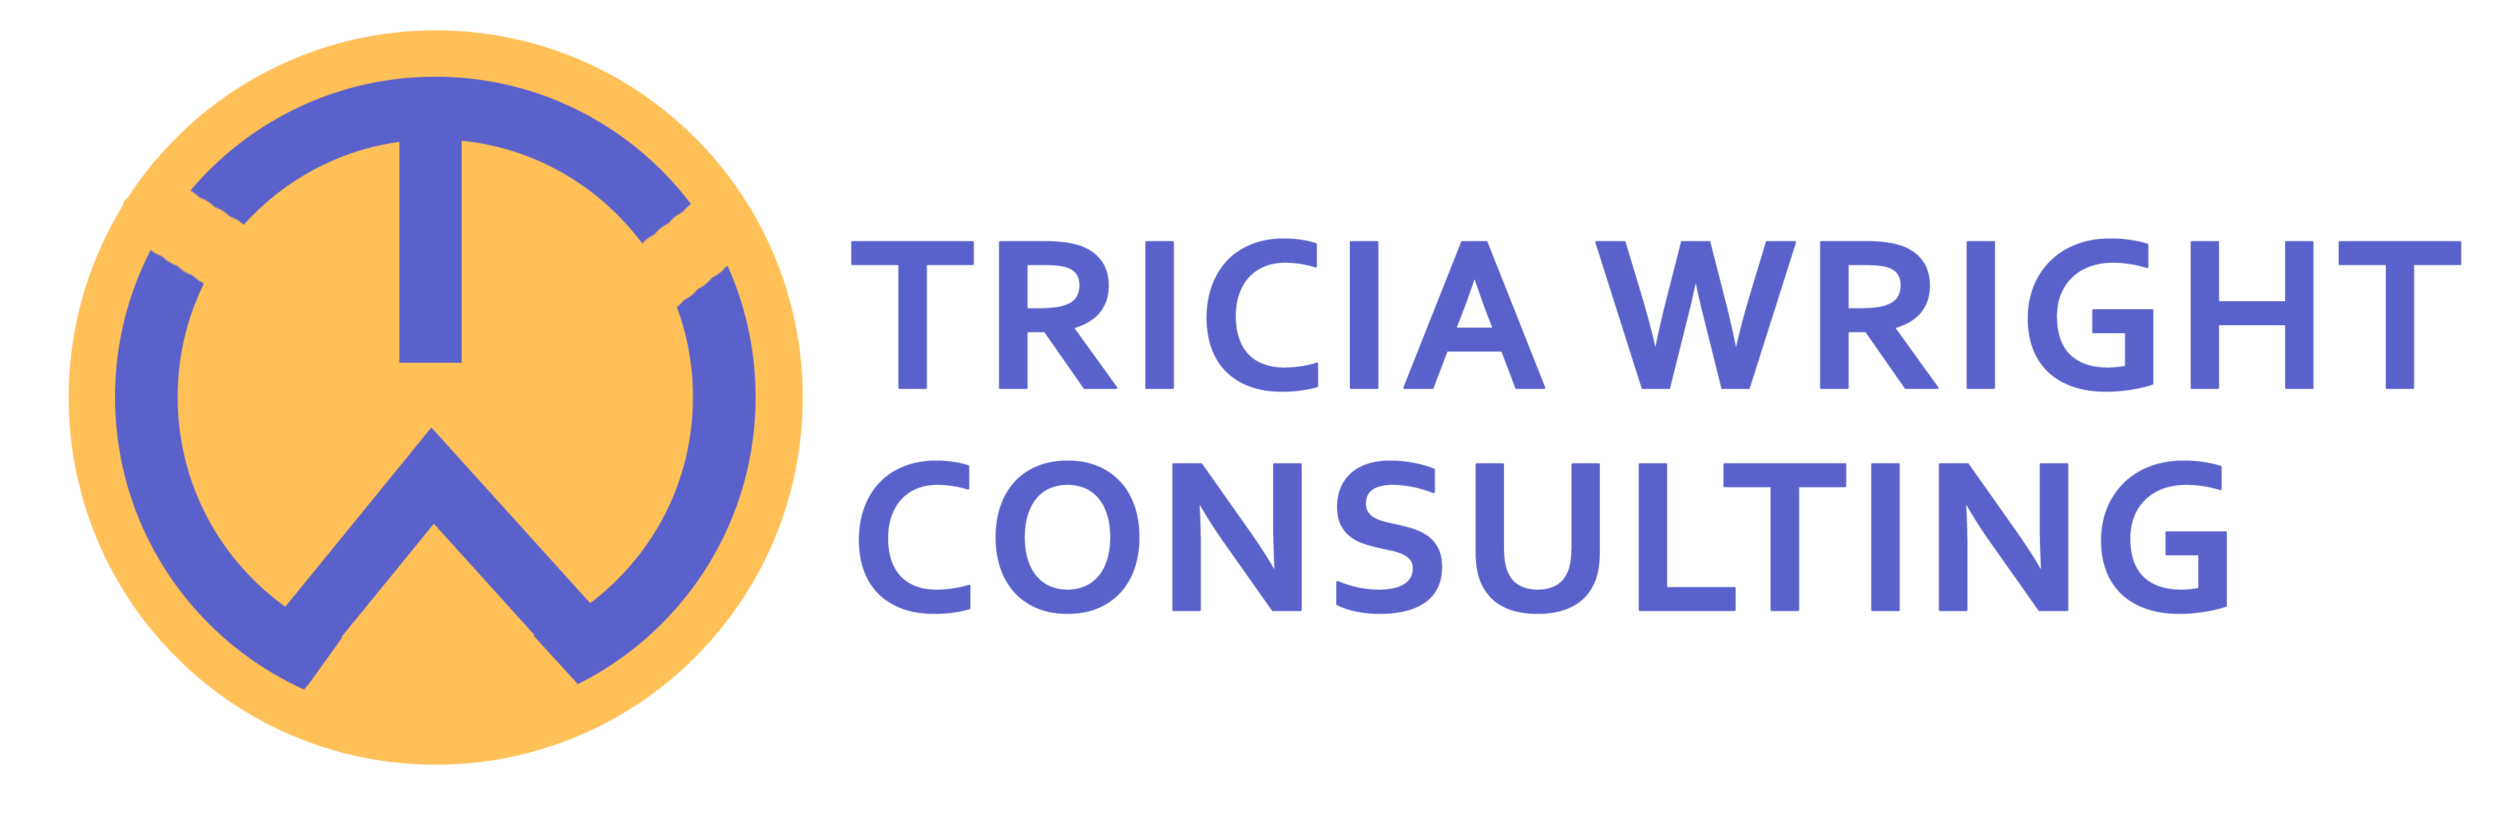 Tricia Wright Consulting